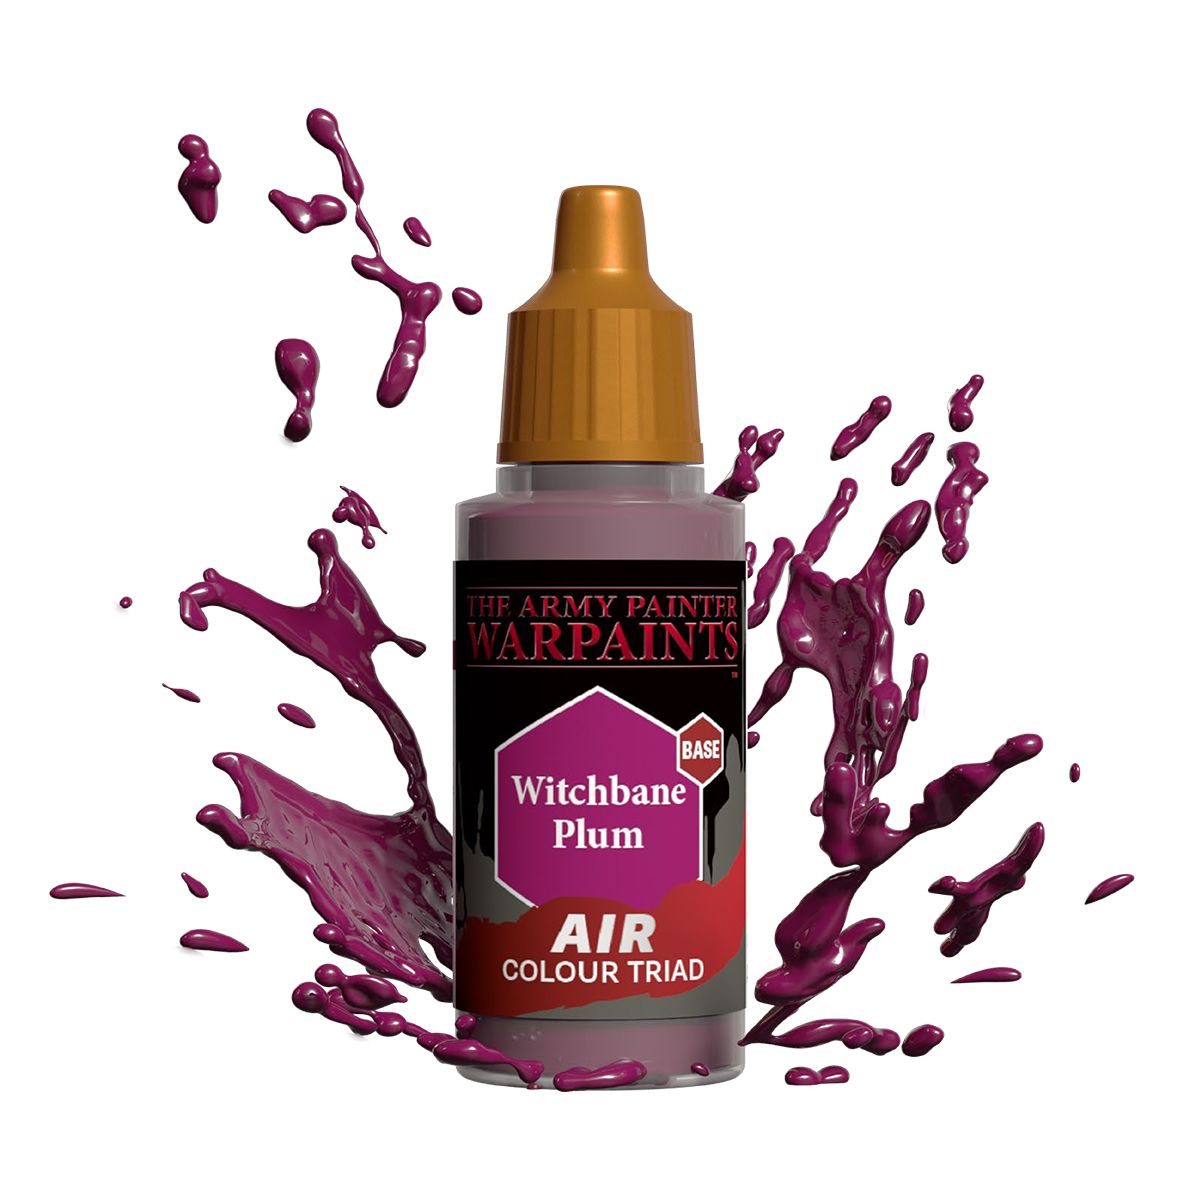 Army Painter Warpaint Air - Witchbane Plum (18ml) - Loaded Dice